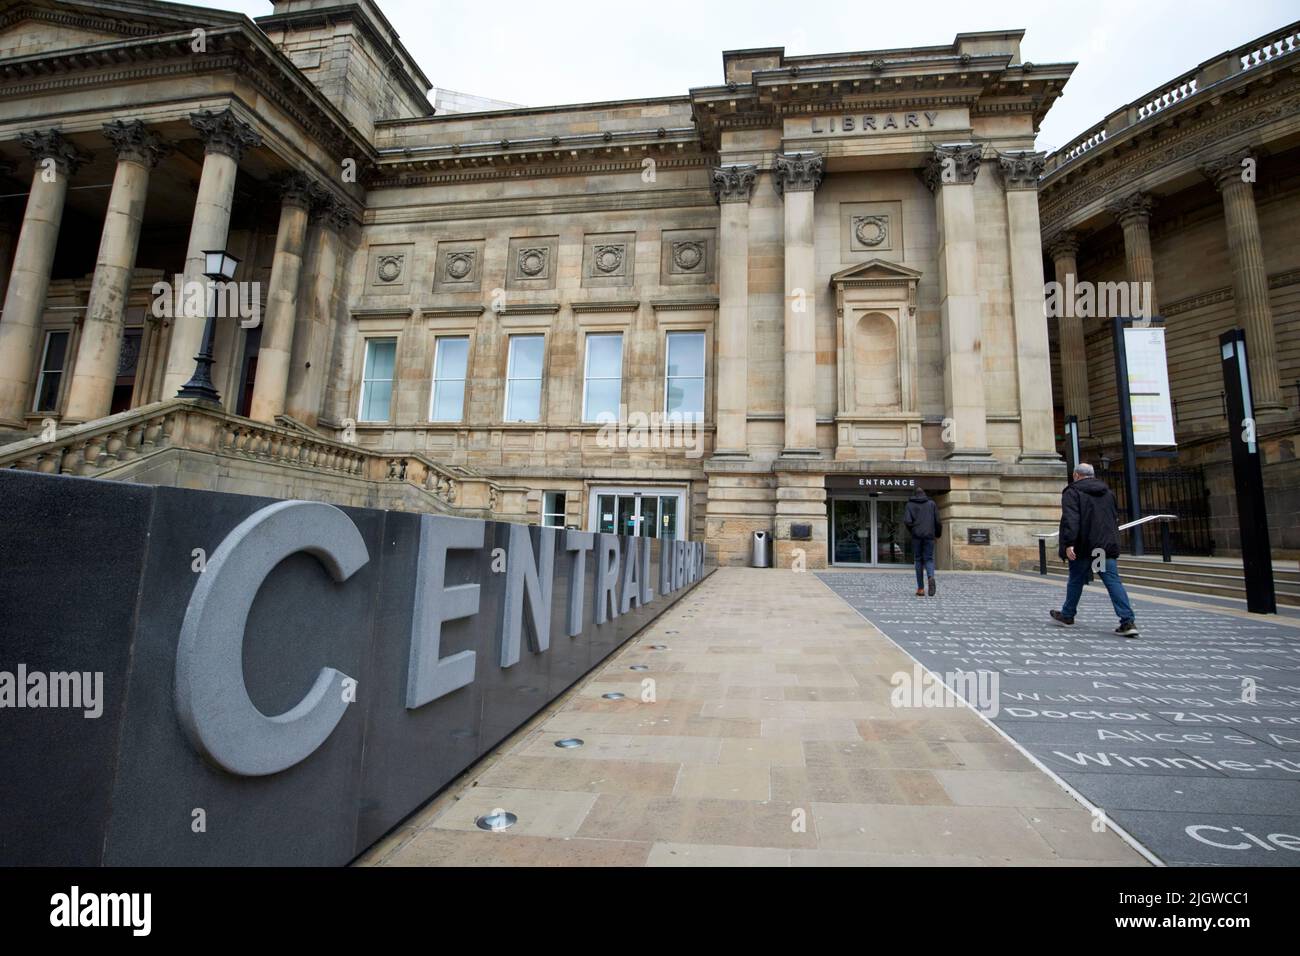 Liverpool Central Library merseyside england uk Stock Photo